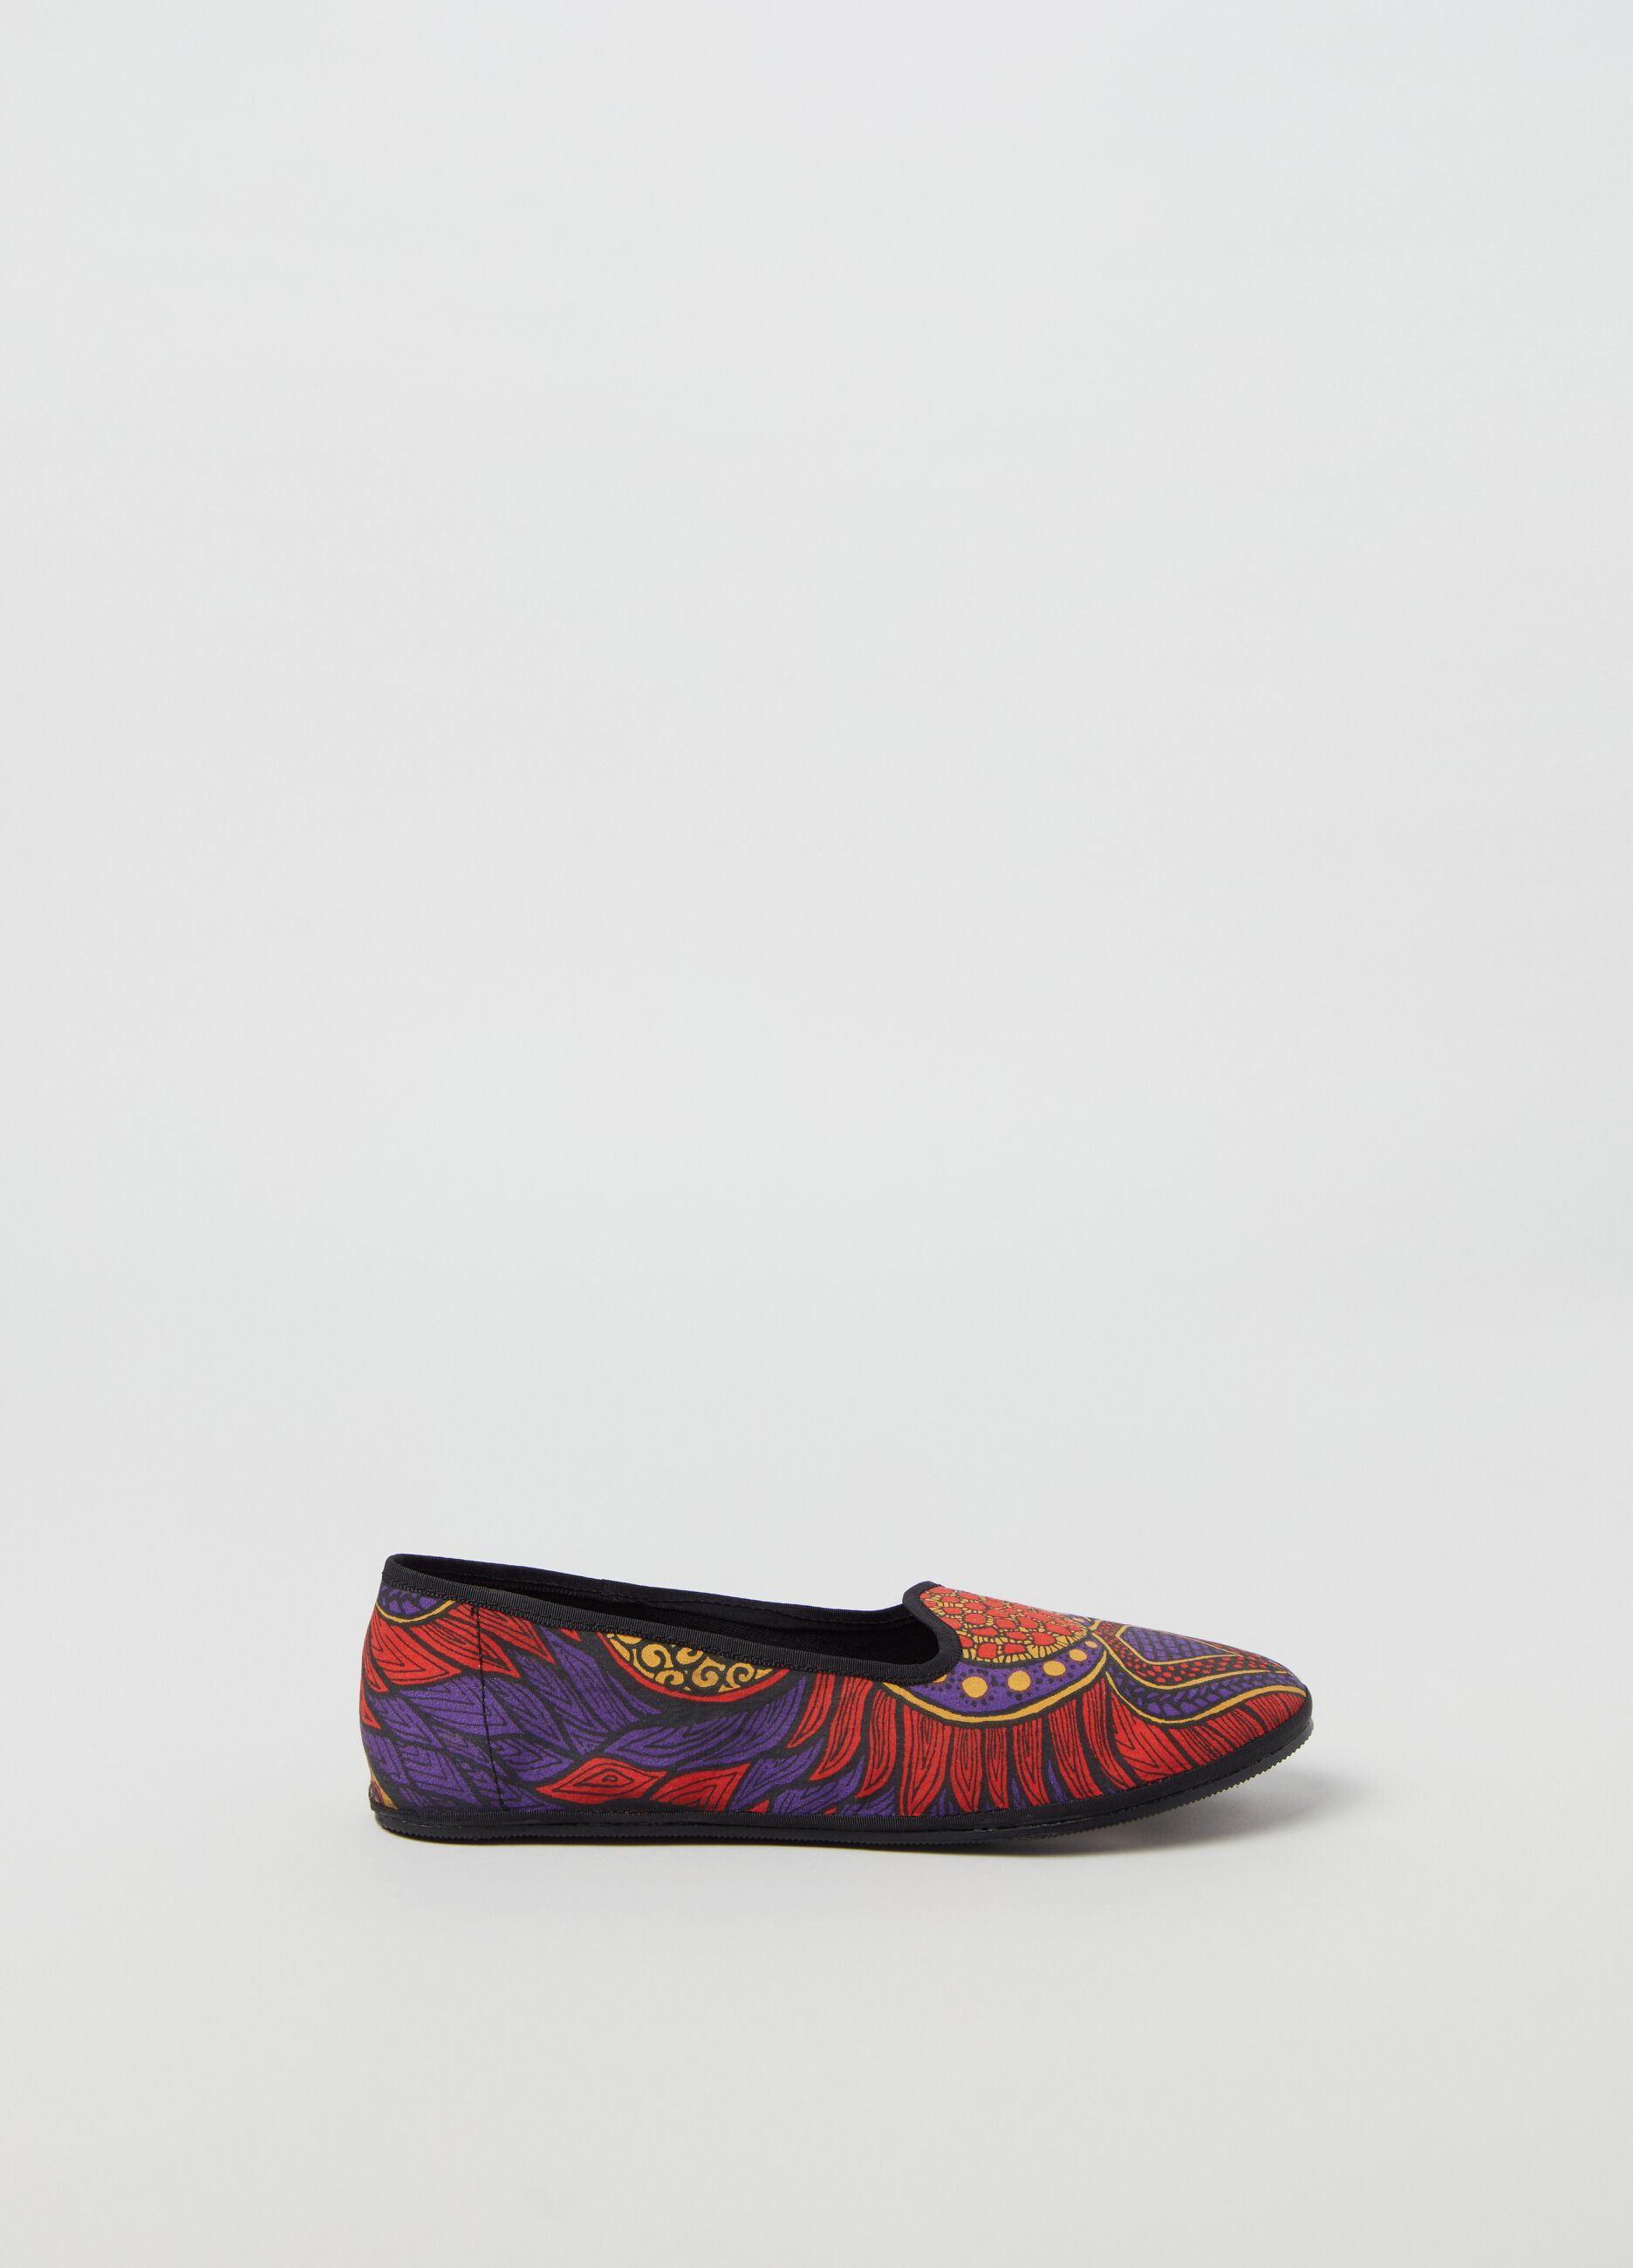 Slipper shoes with ethnic pattern